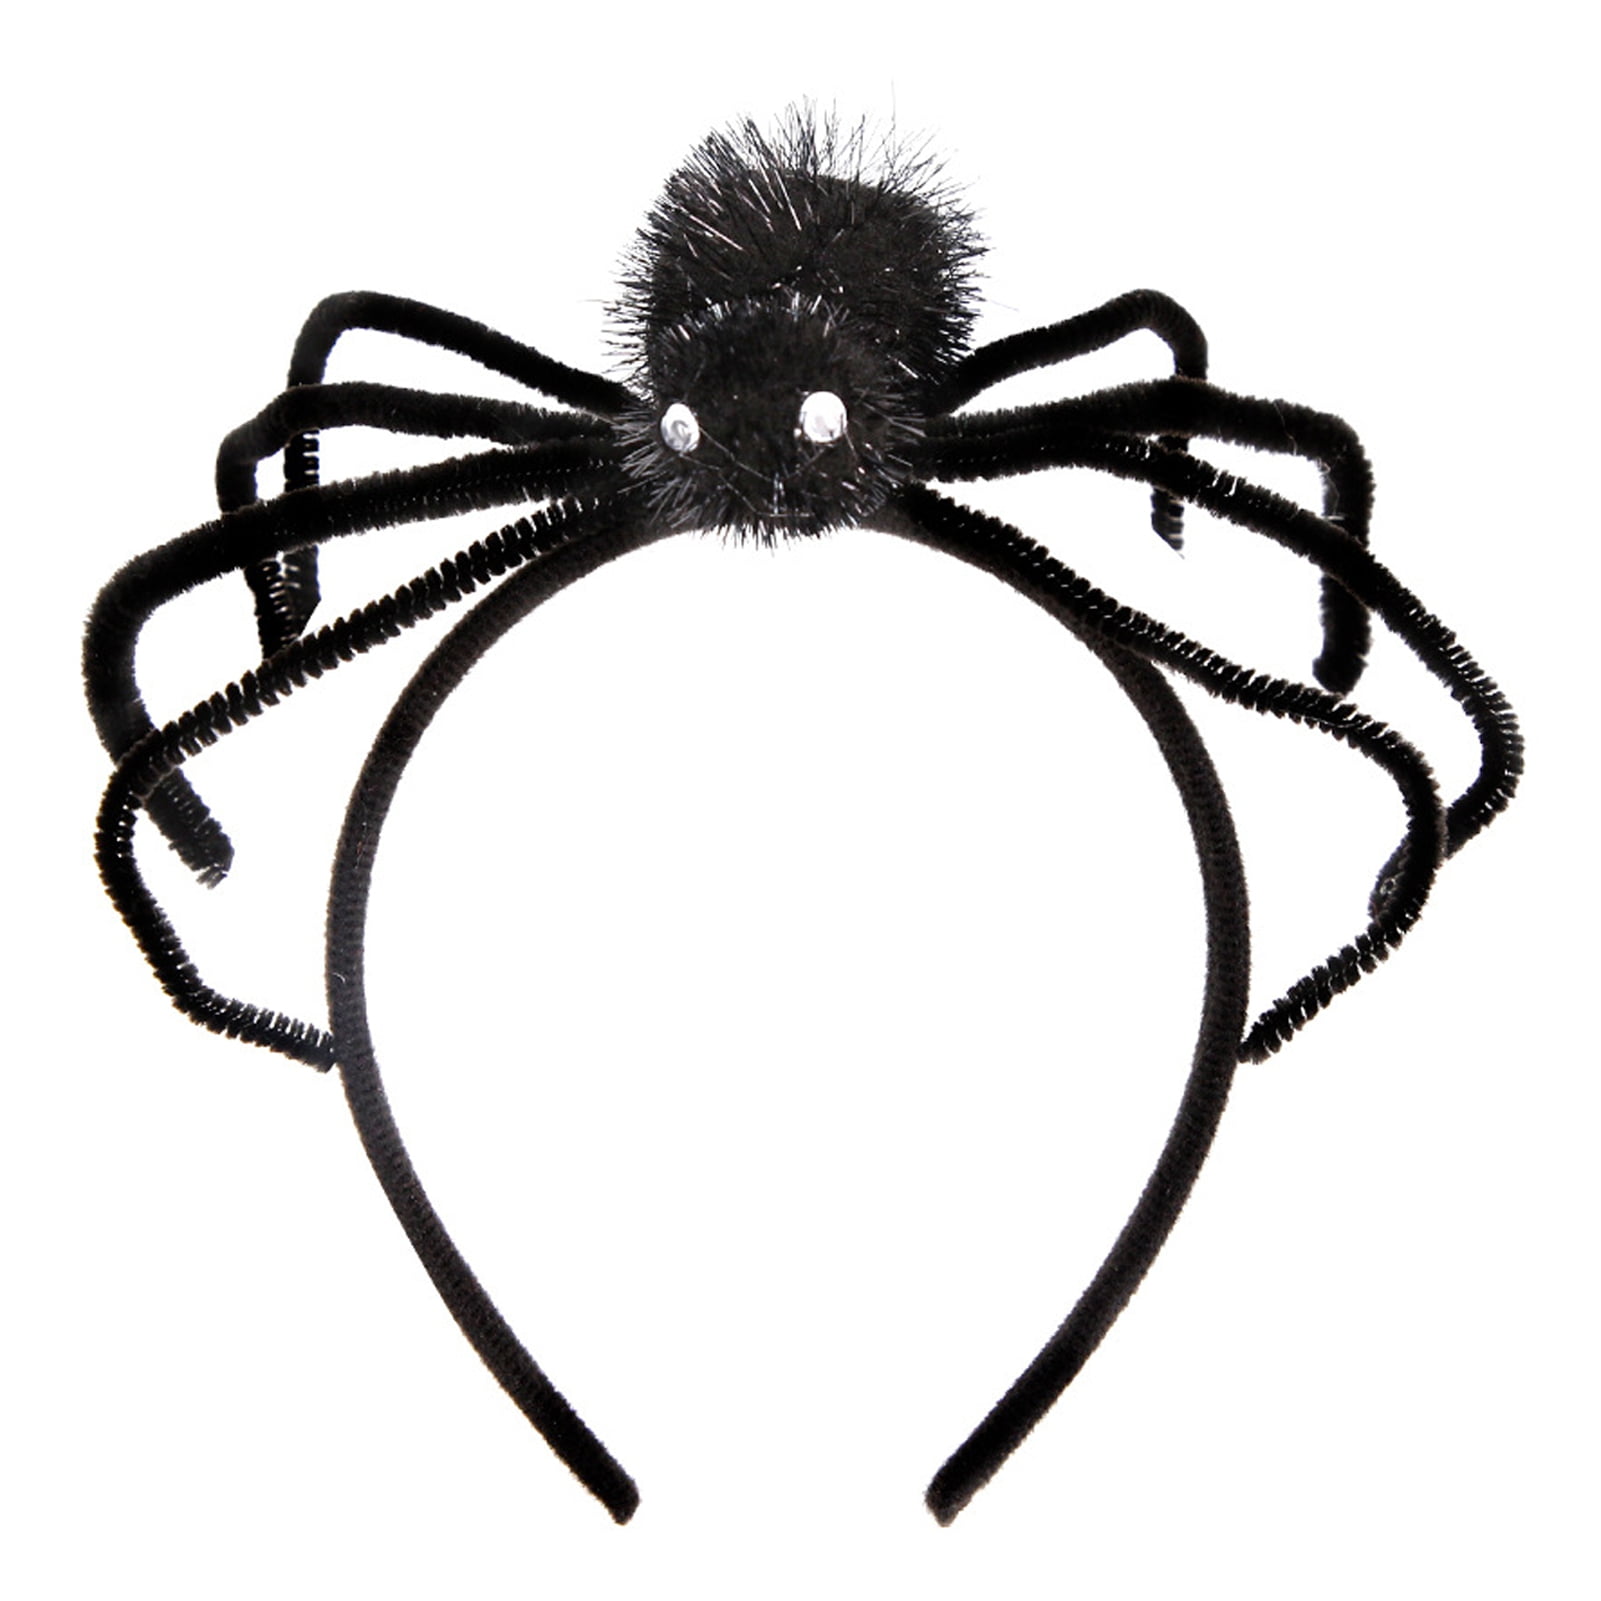 wirlsweal Halloween Headband Halloween Party Headband Halloween Tinsels  Spider Headband Funny Spooky Hairstyle Decoration for Ghost Festival Party 